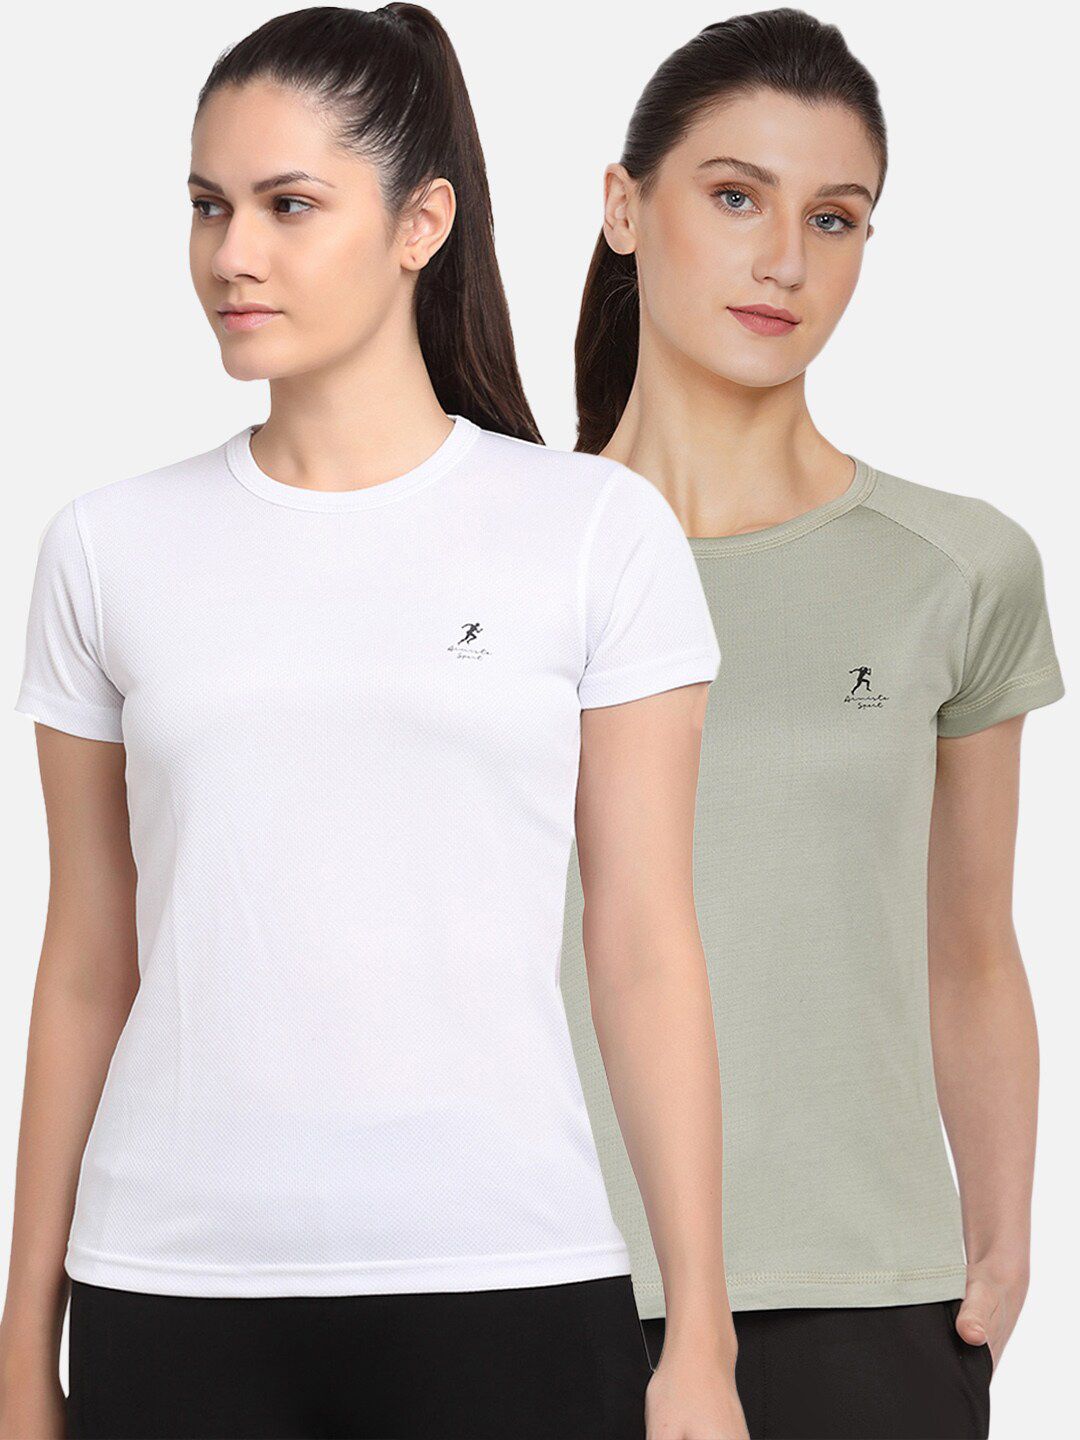 ARMISTO Women Pack of 2 White & Sage Green Dri-FIT Slim Fit Training or Gym T-shirts Price in India